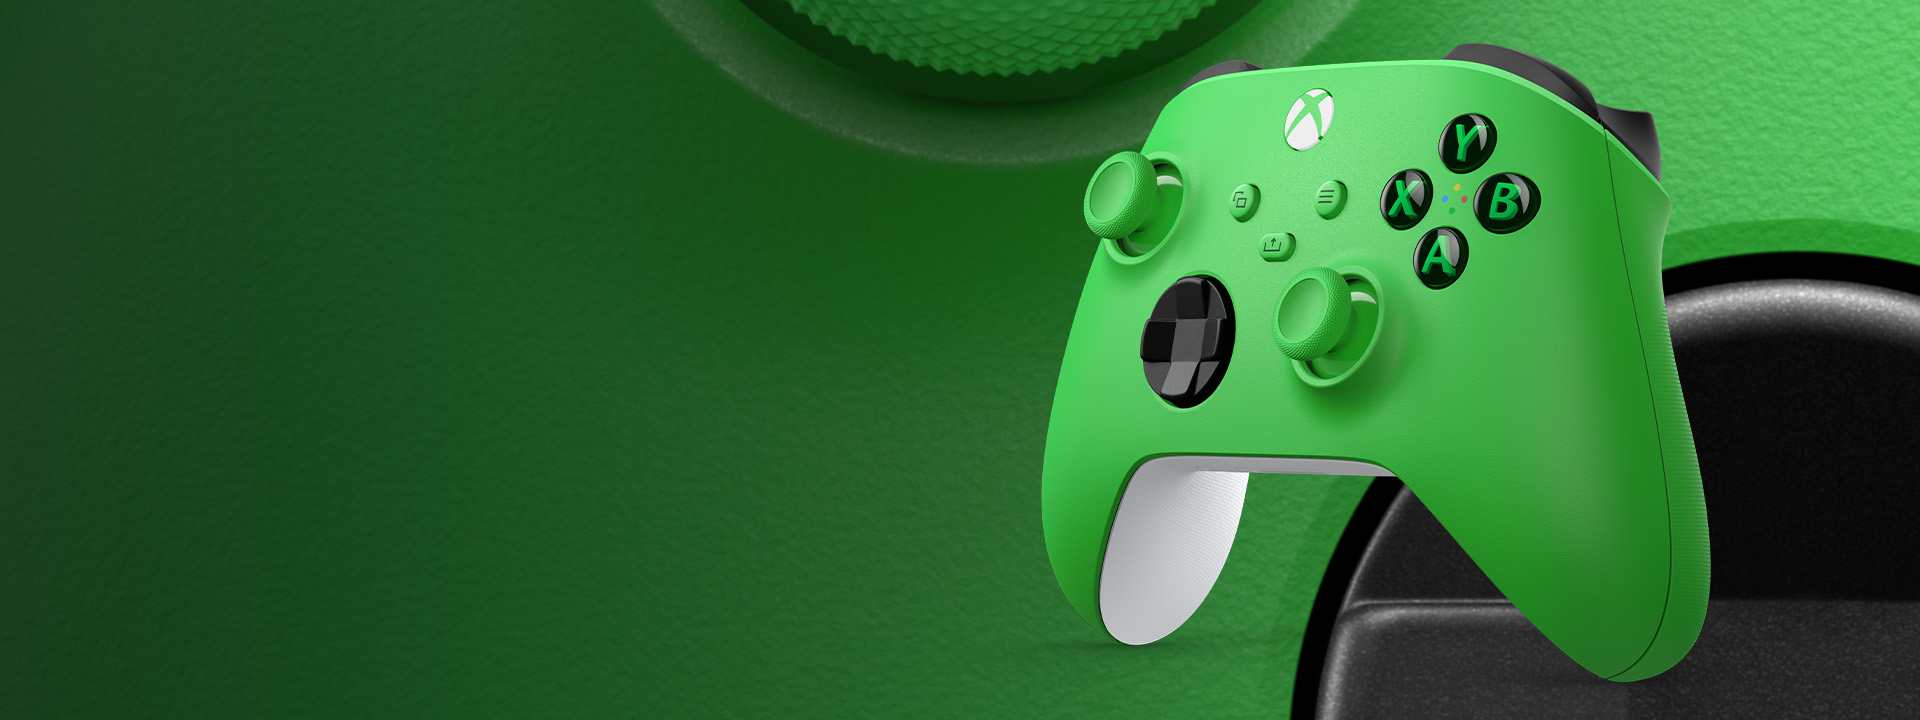 Accessories & Controllers | Xbox